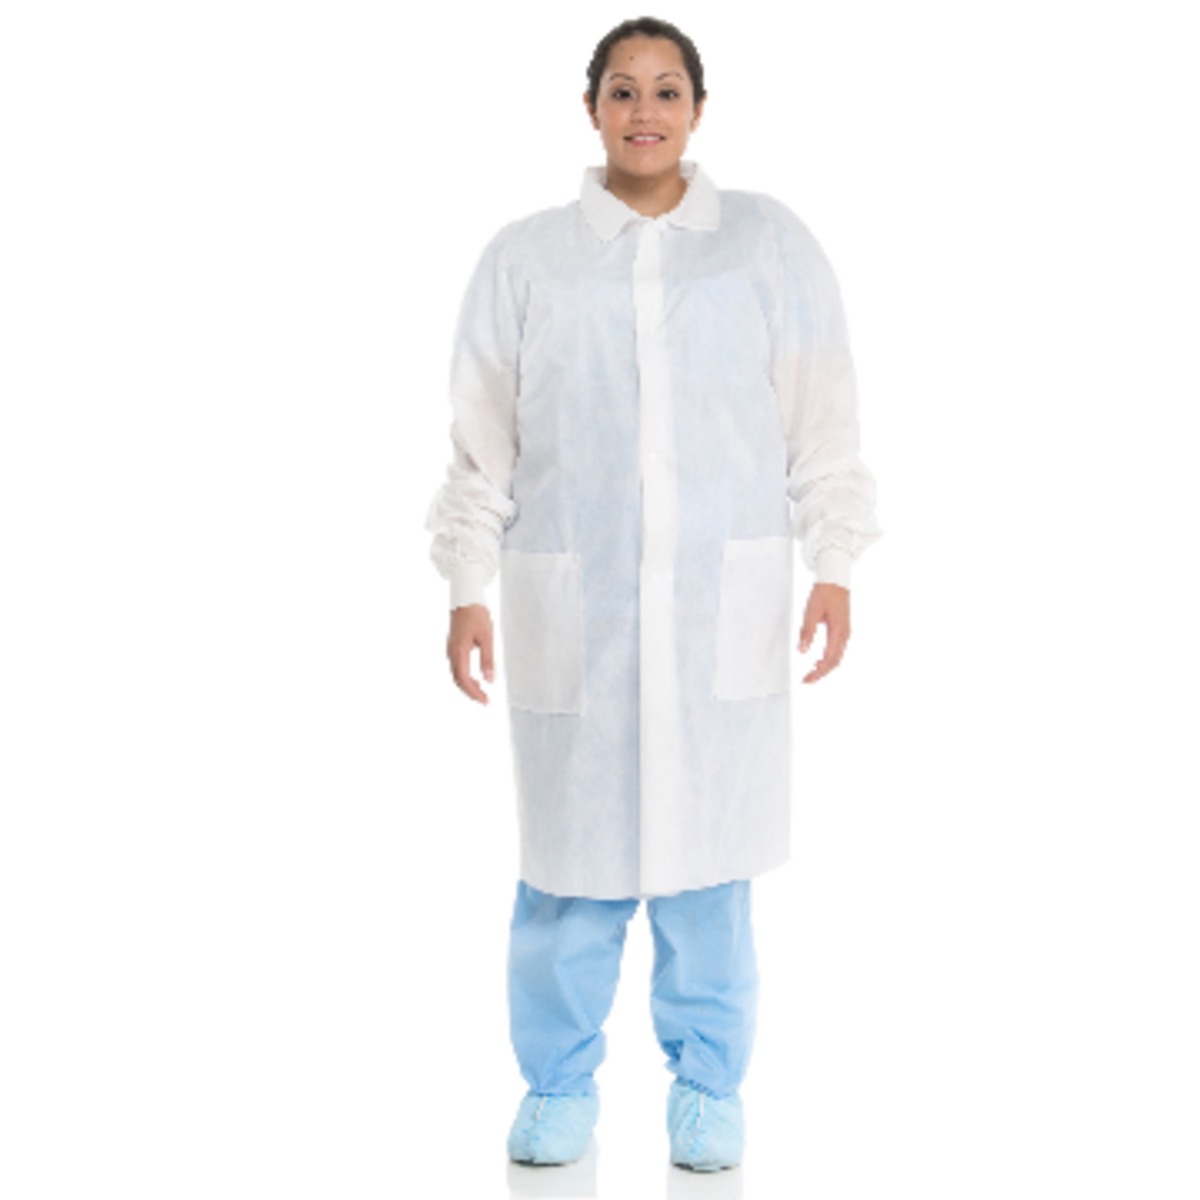 Kimberly-Clark Professional* 2X White BASIC* SMS Disposable Lab Coat/Lab Jacket (Availability restrictions apply.)